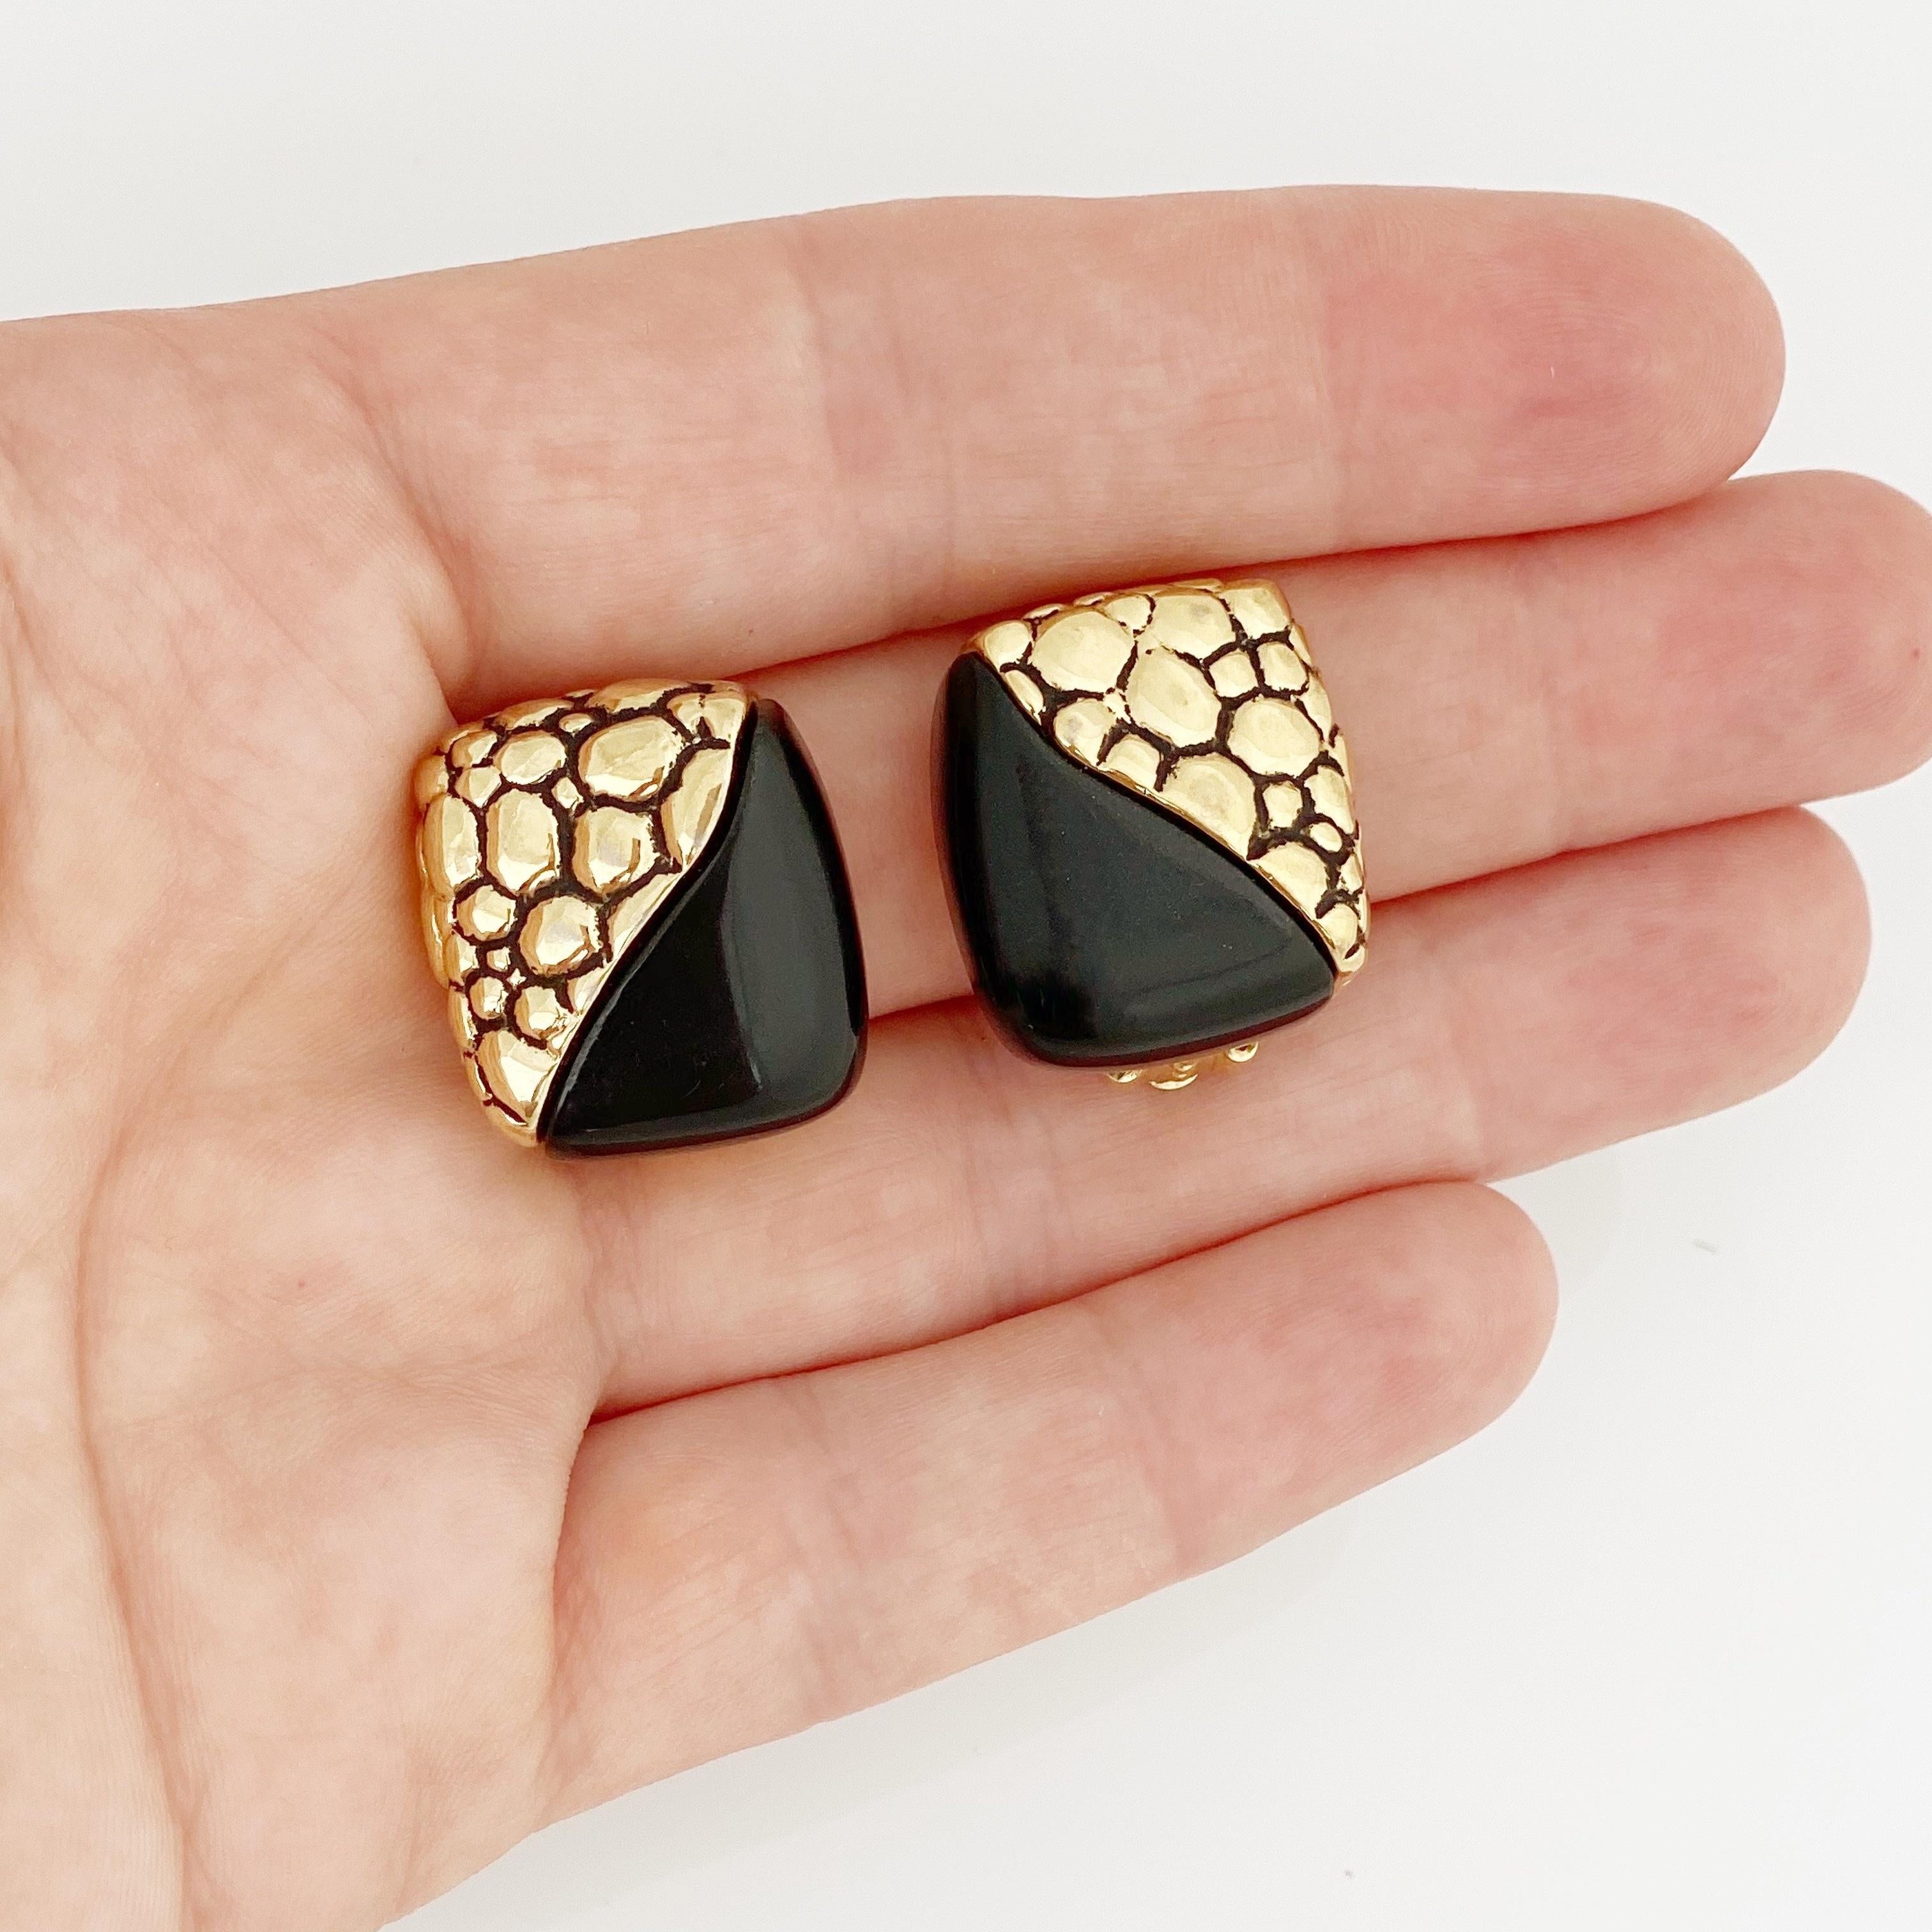 givenchy earrings studs